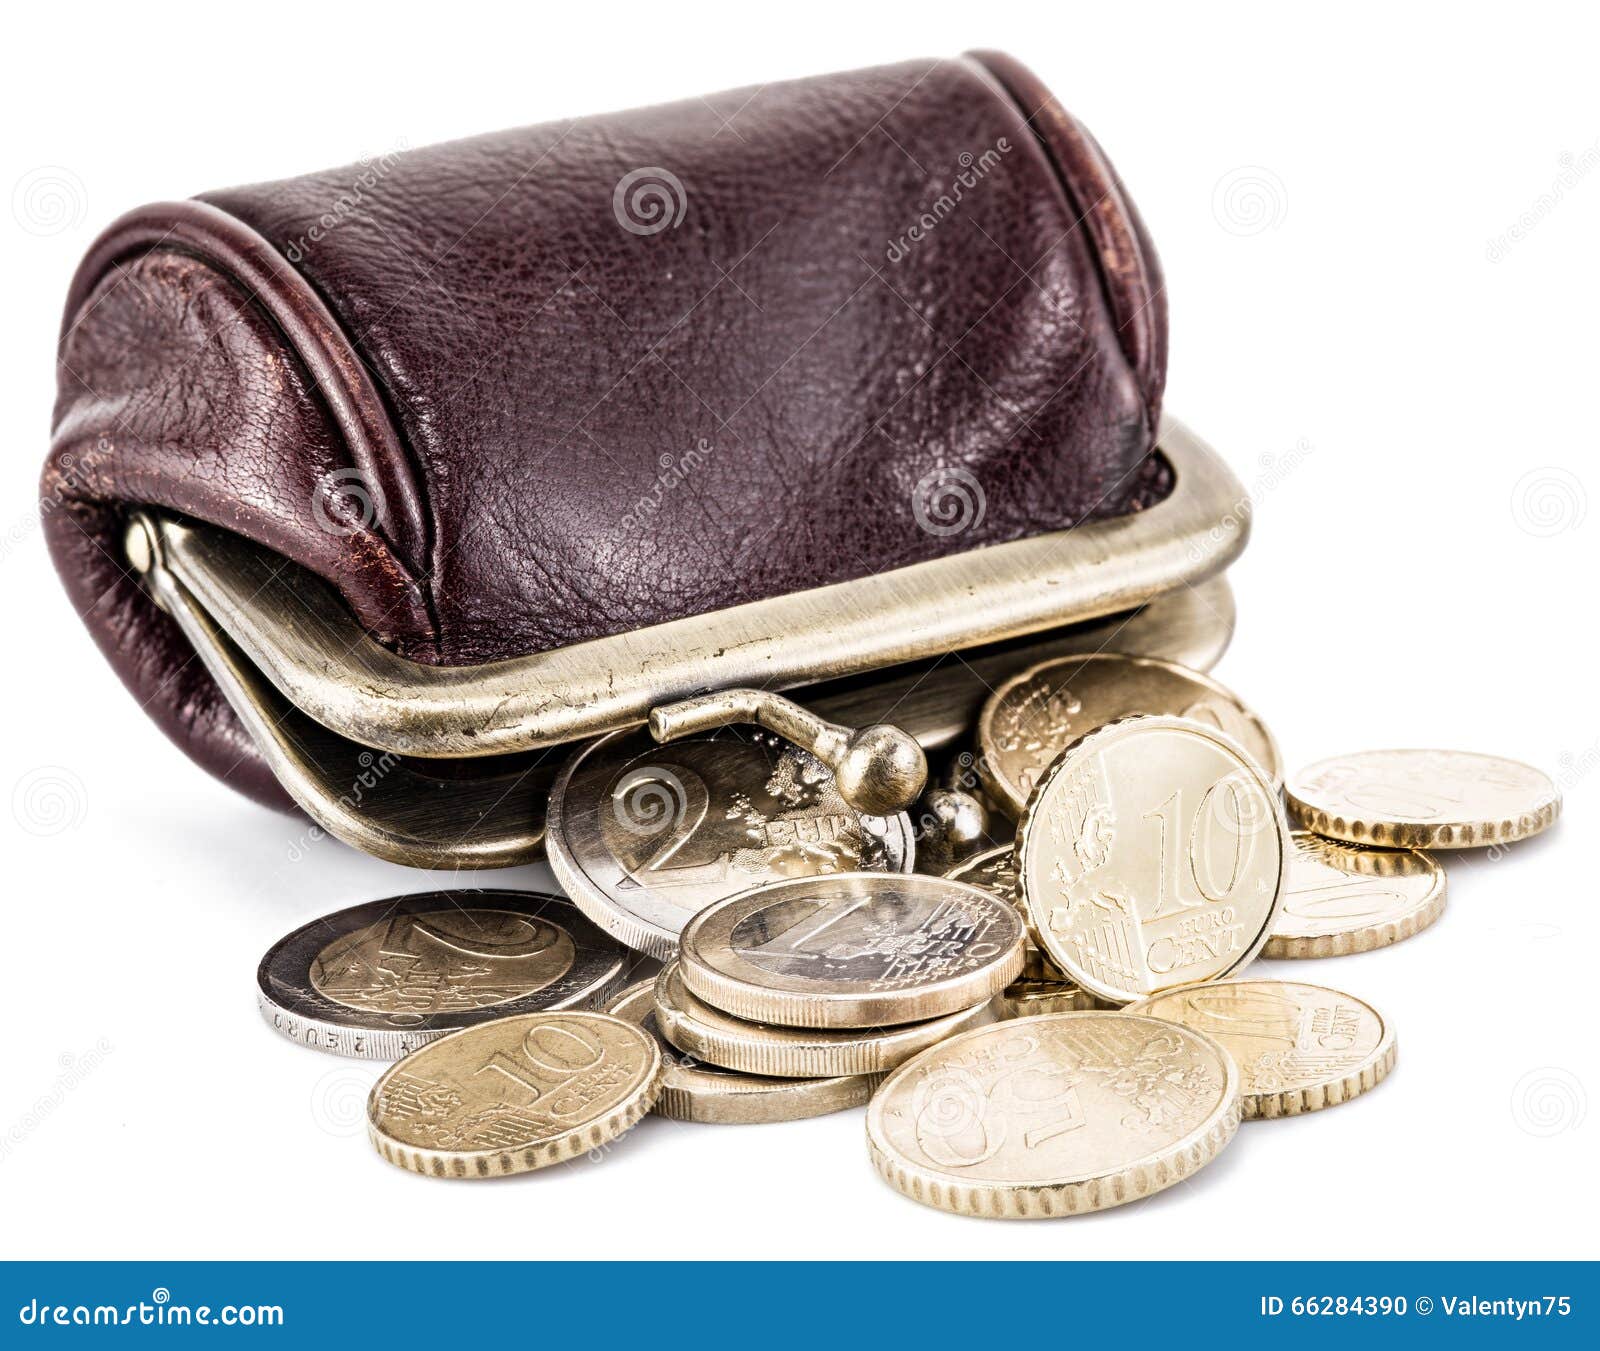 Small Leather Purse For Coins. Stock Photo - Image of economy, object: 66284390